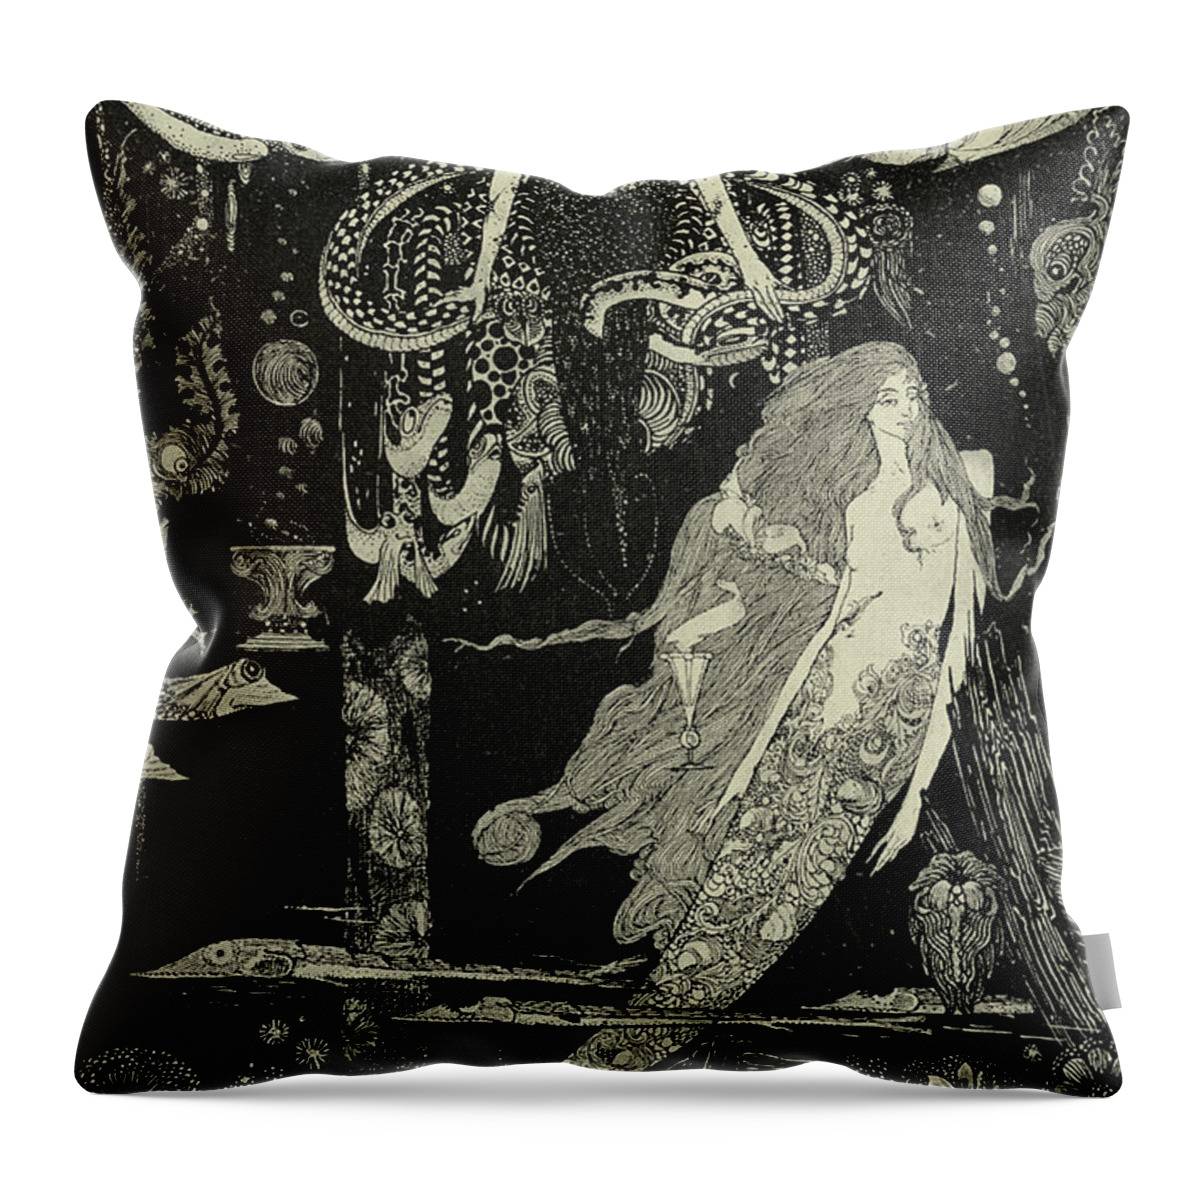 Mermaid Throw Pillow featuring the painting The Little Mermaid by Harry Clarke